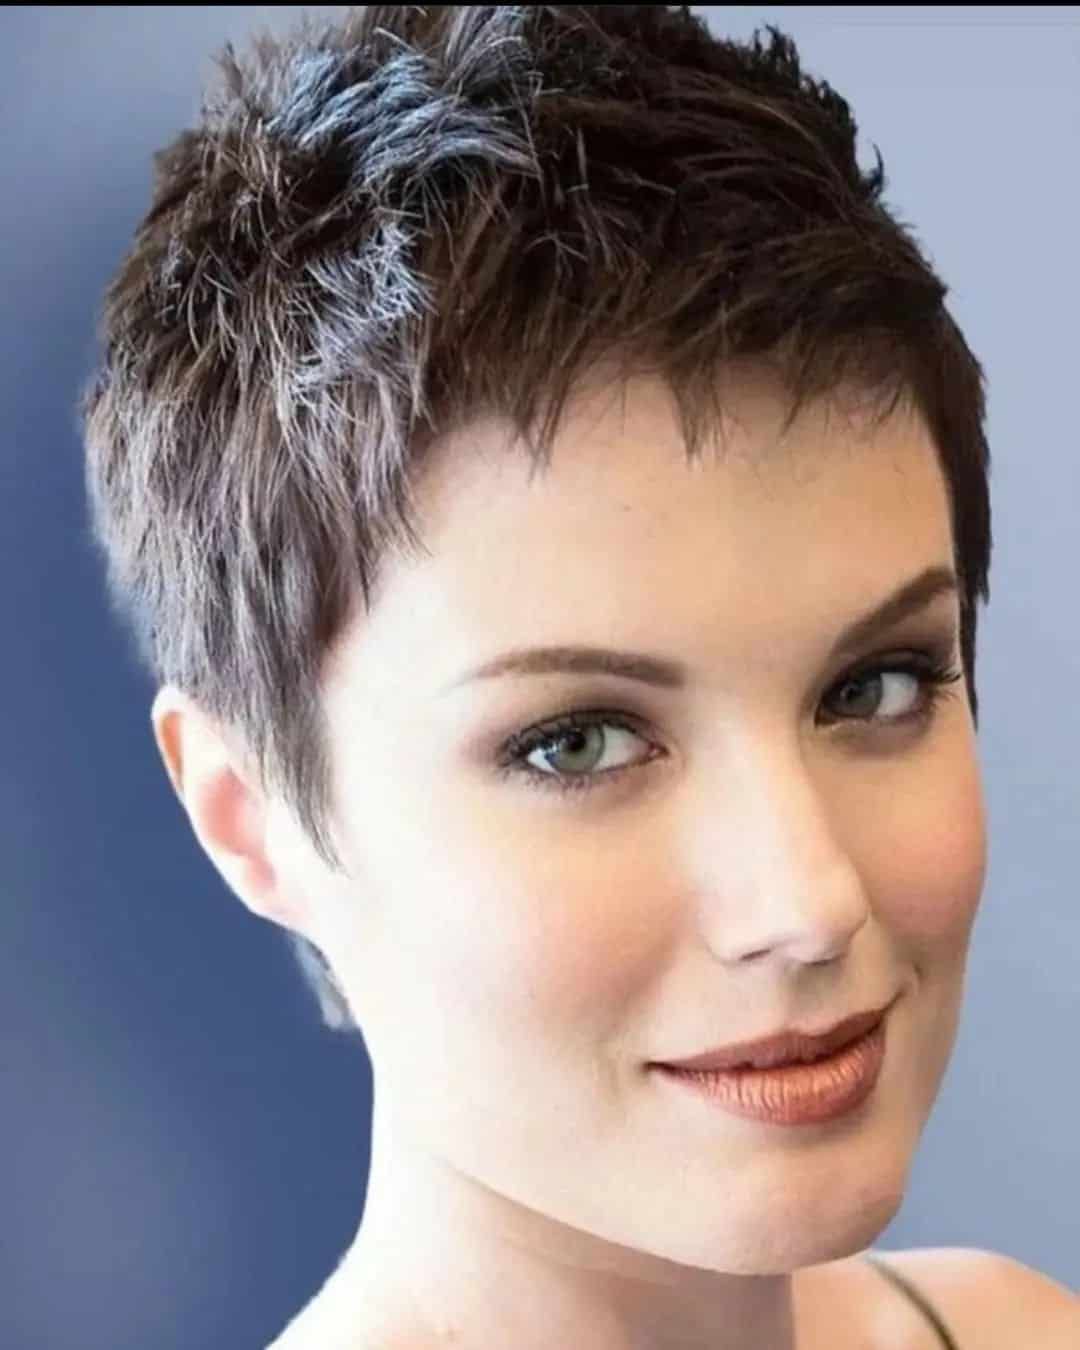 Rocking the Pixie Cut: Embracing Very Short Haircuts